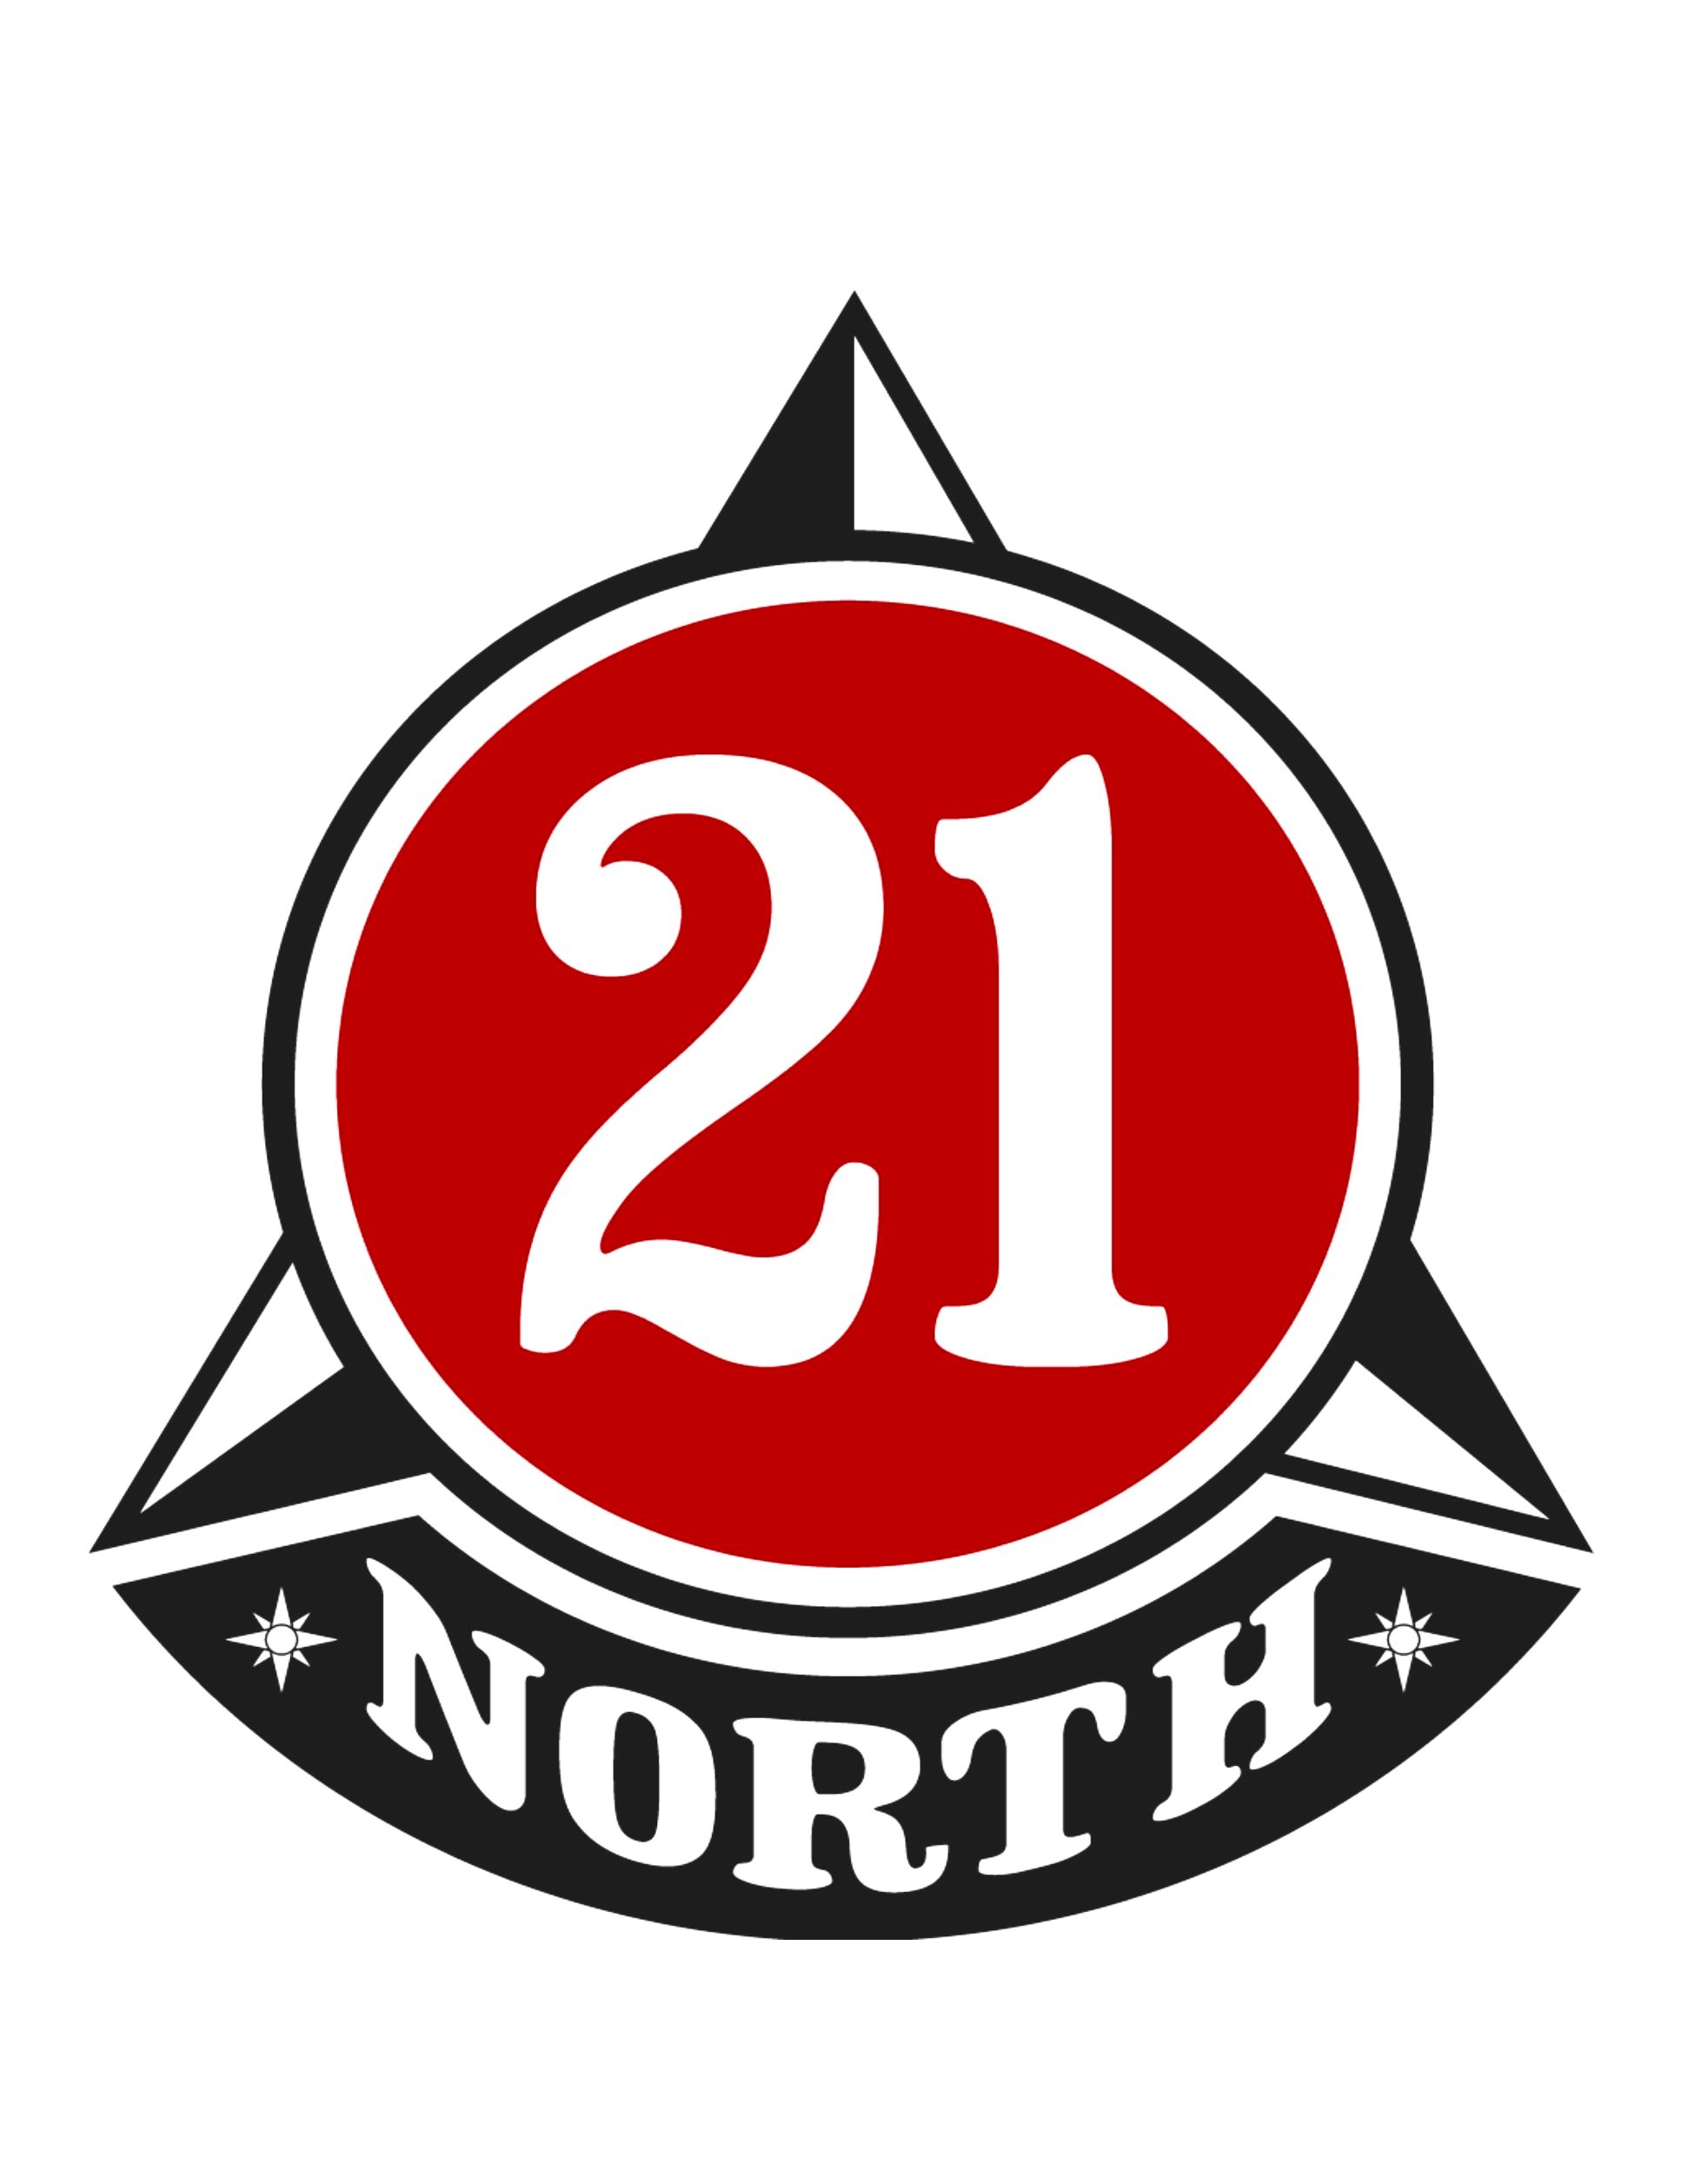 21 NORTH eatery and cellar